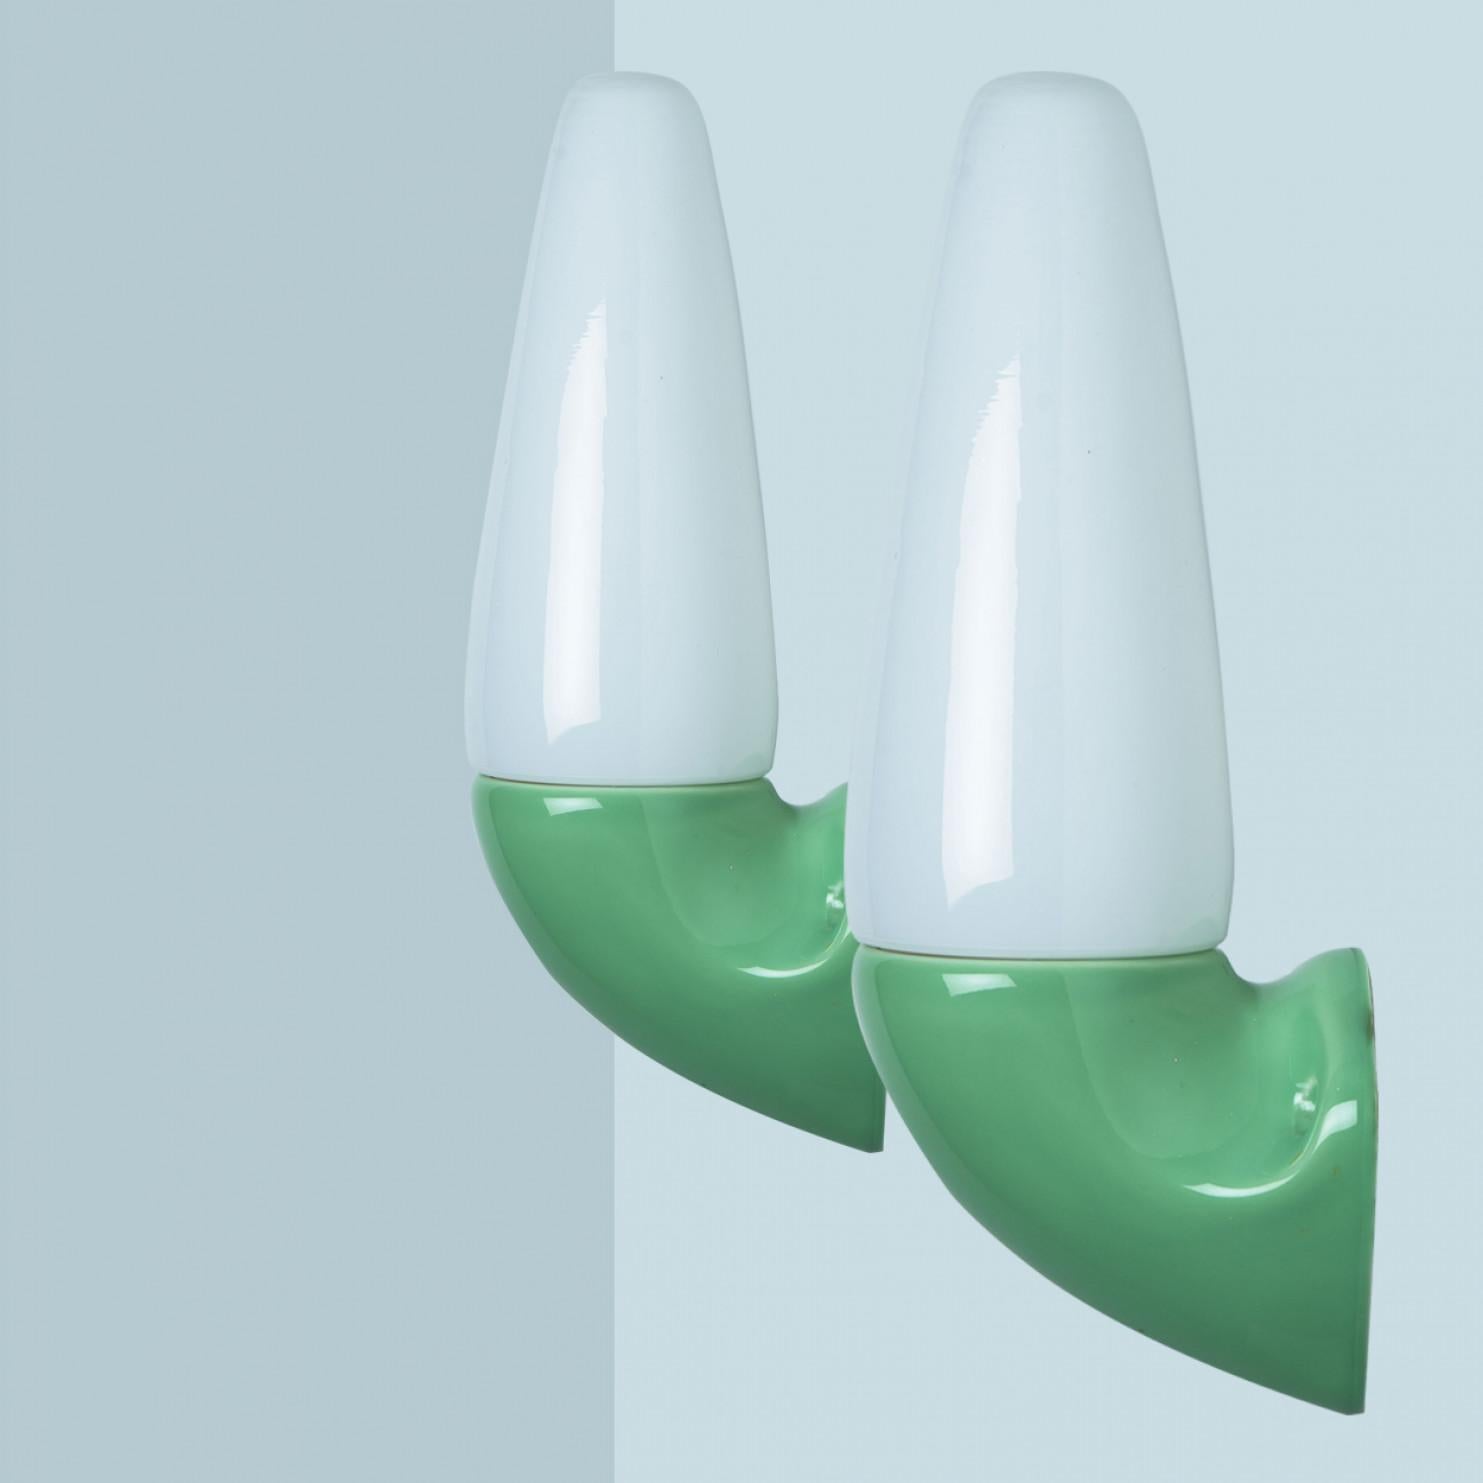 Pair of Green Ceramic Wall Lights, Sigvard Bernadotte, 1970 For Sale 6